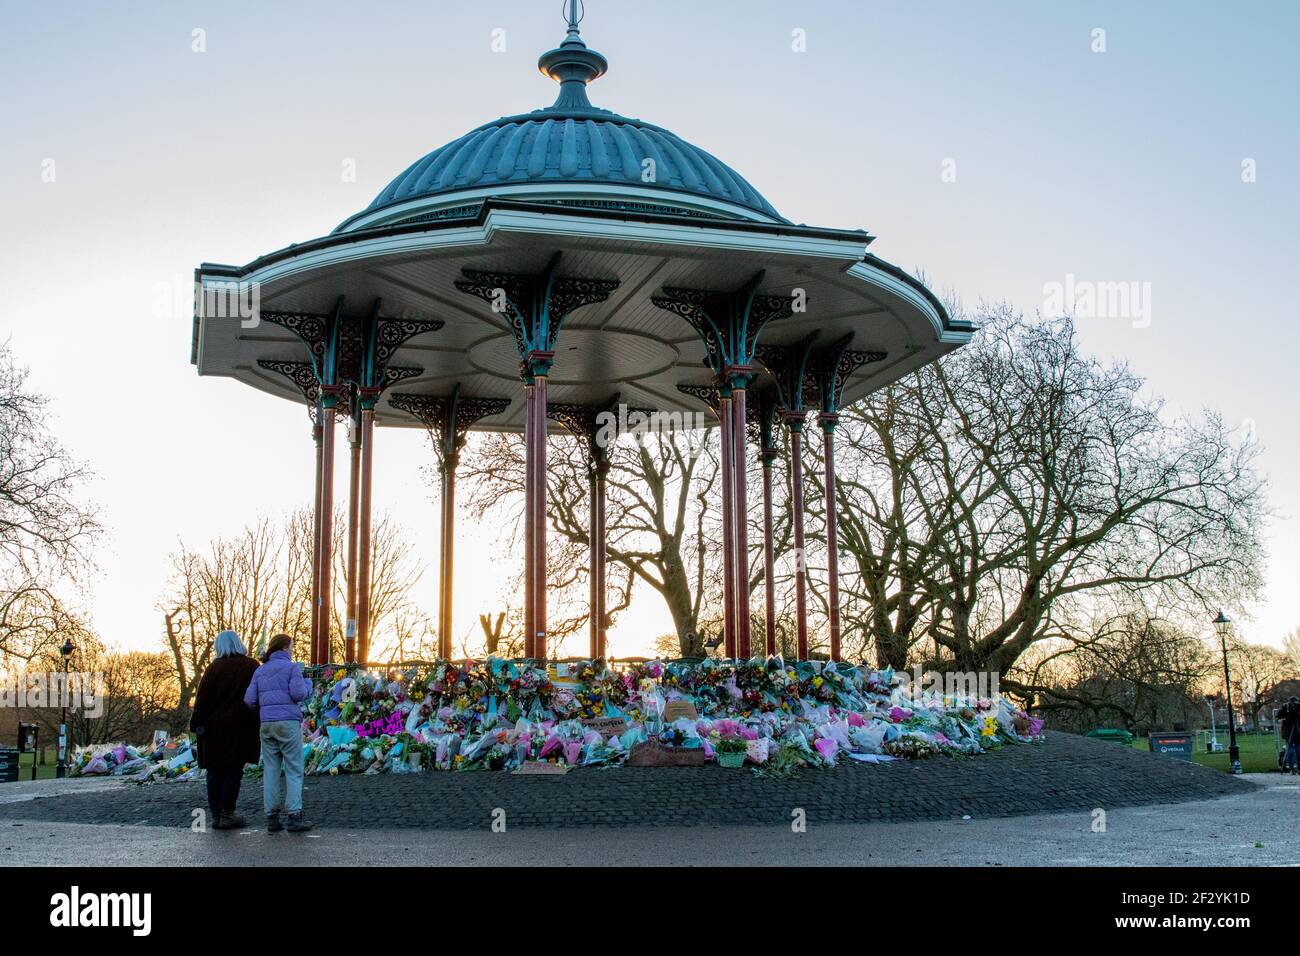 London, UK. 14th March, 2021. The flowers have been placed back neatly, and a few candles are still lit in memory of Sarah Everard and for women everywhere, following terrible scenes the night before where Police turned a peaceful vigil into an unsafe protest at Clapham Common Bandstand. Credit: Liam Asman/Alamy Live News Stock Photo